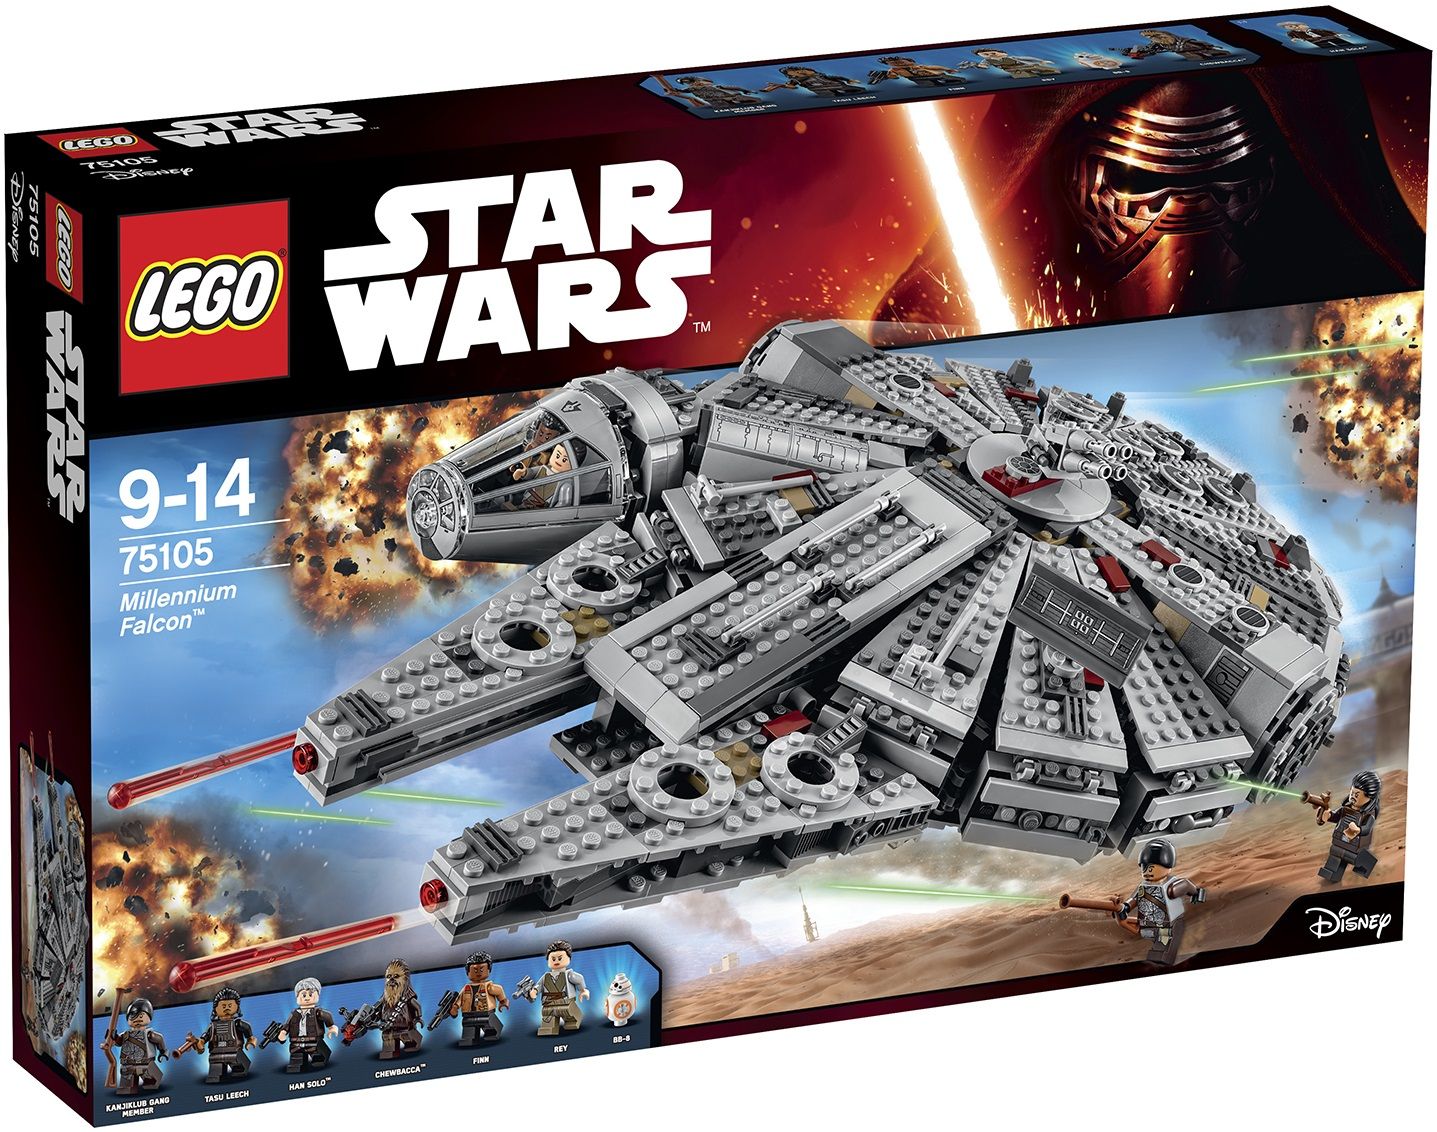 Breaking News! New Star Wars Lego Sets for The Force Awakens Leaked!